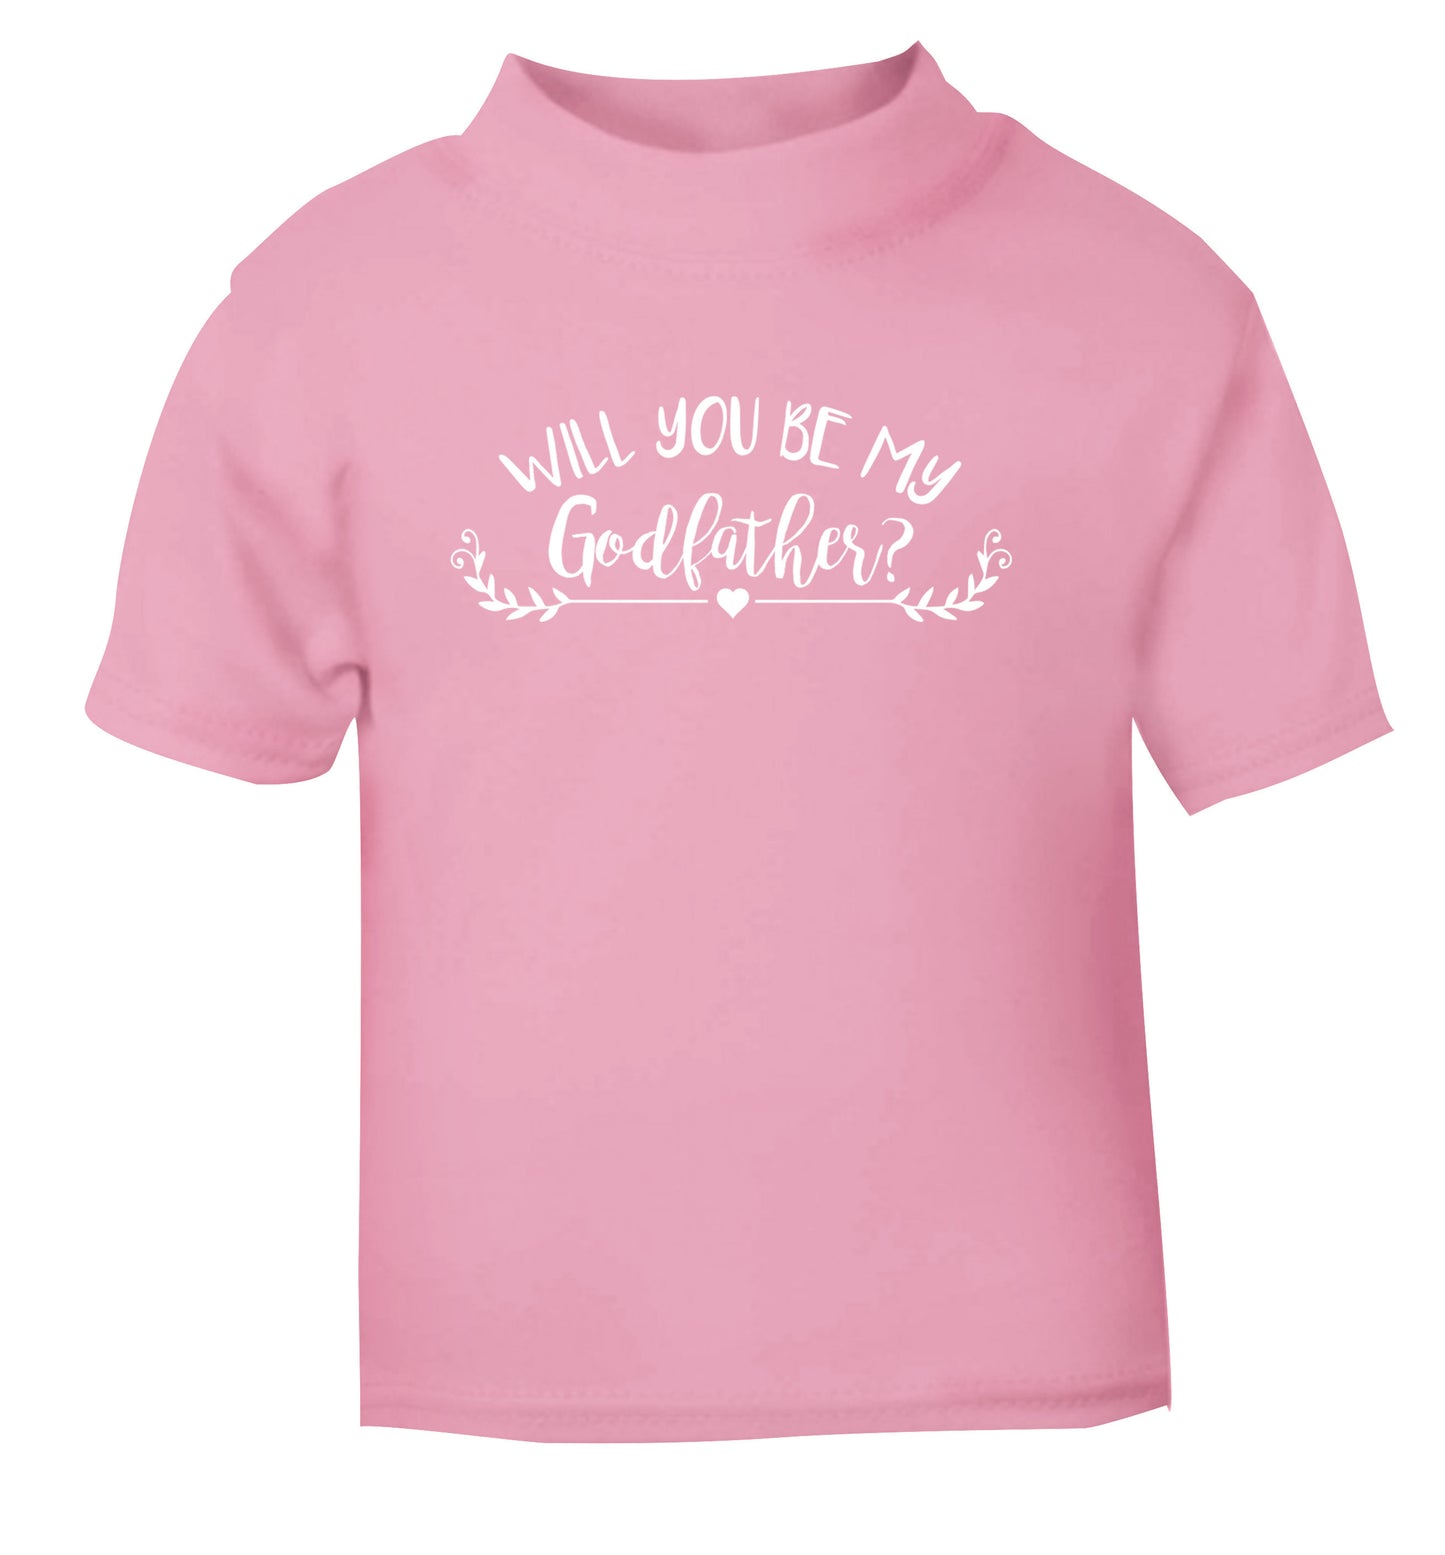 Will you be my godfather? light pink Baby Toddler Tshirt 2 Years